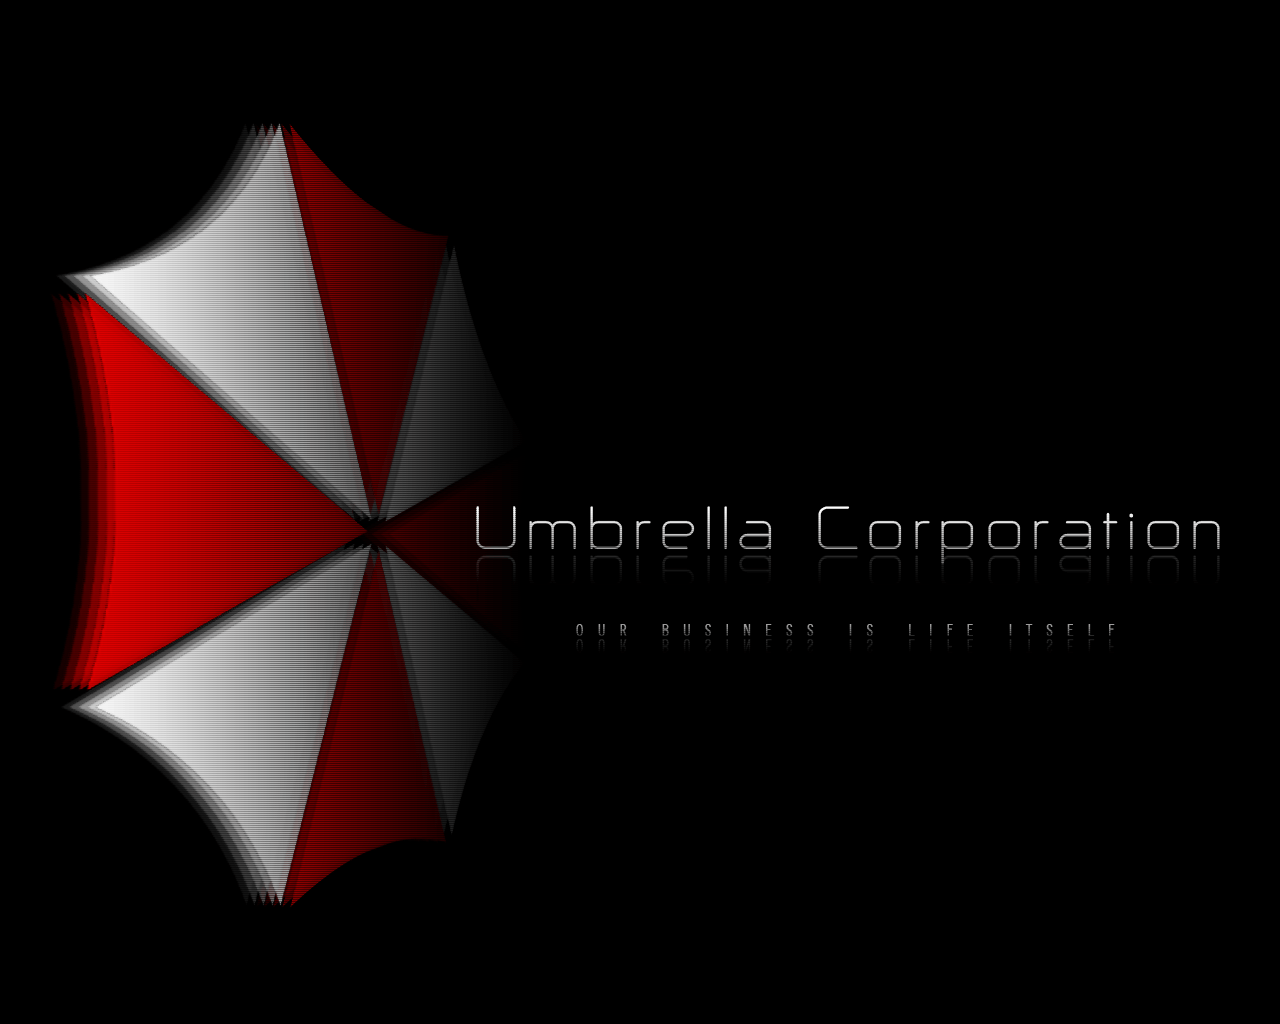 Umbrella Corp Wallpaper 01 By Disease Of Machinery